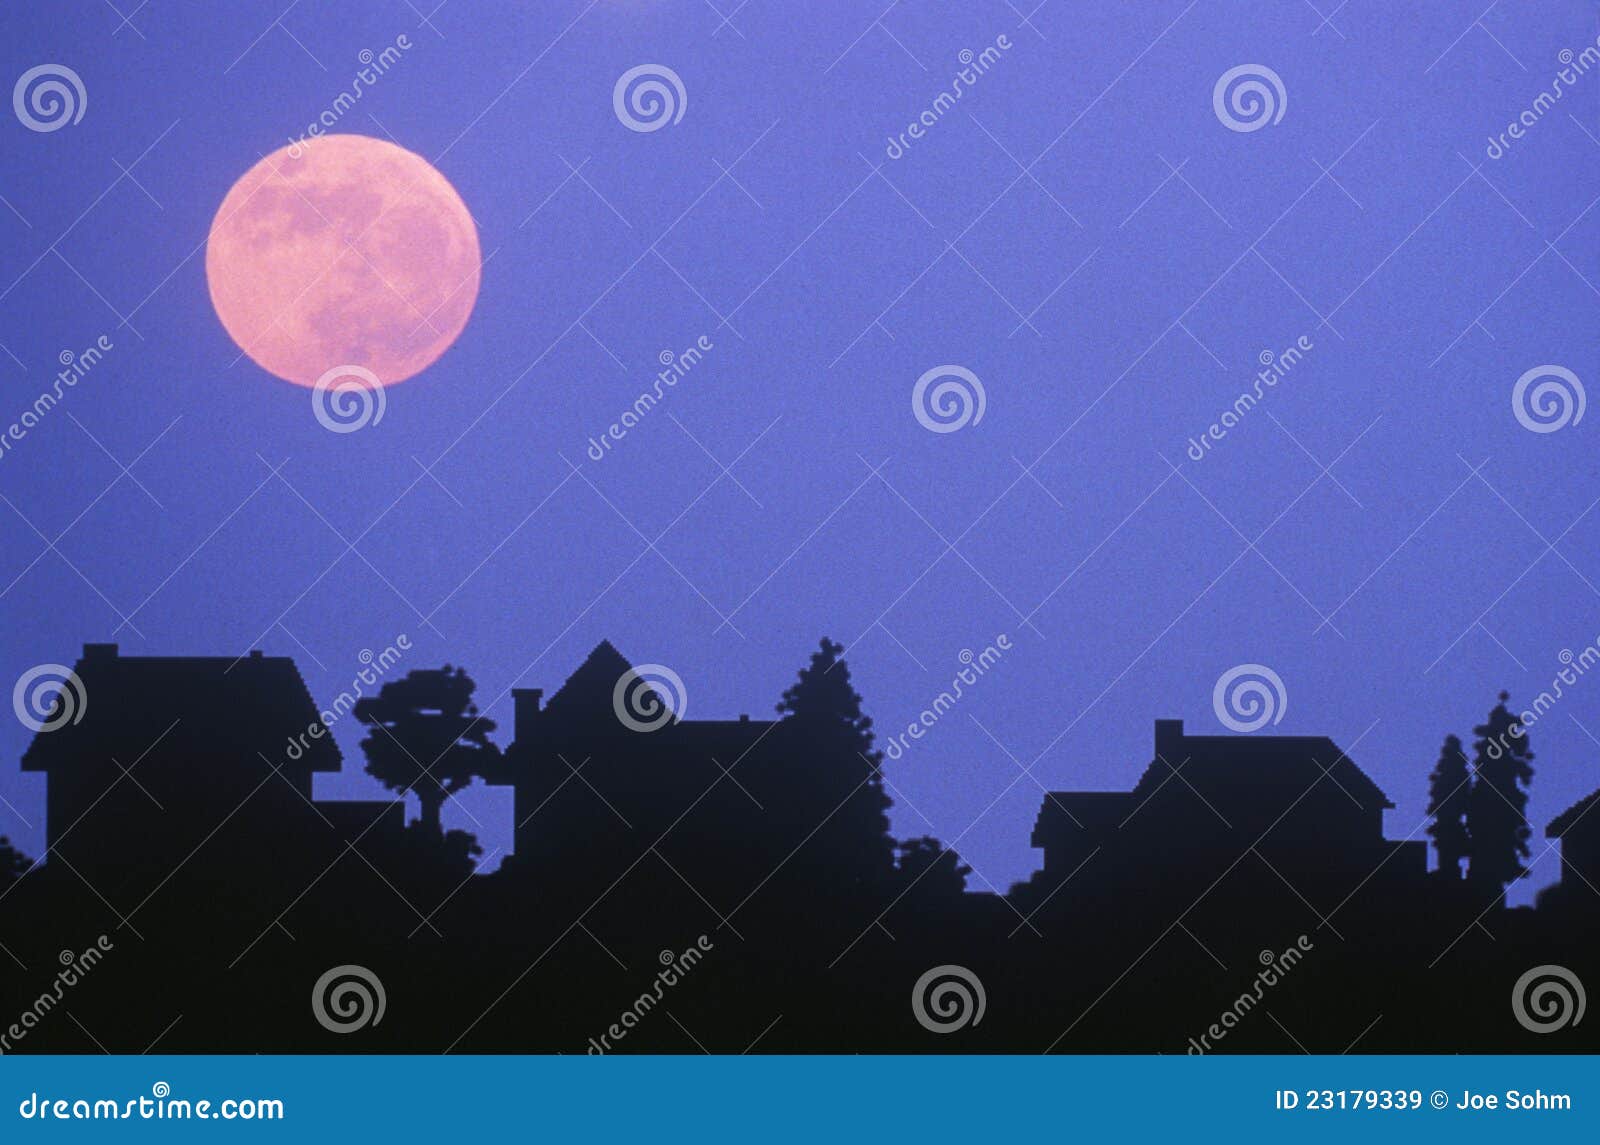 Silhouette of full moon over family homes in typical neighborhood